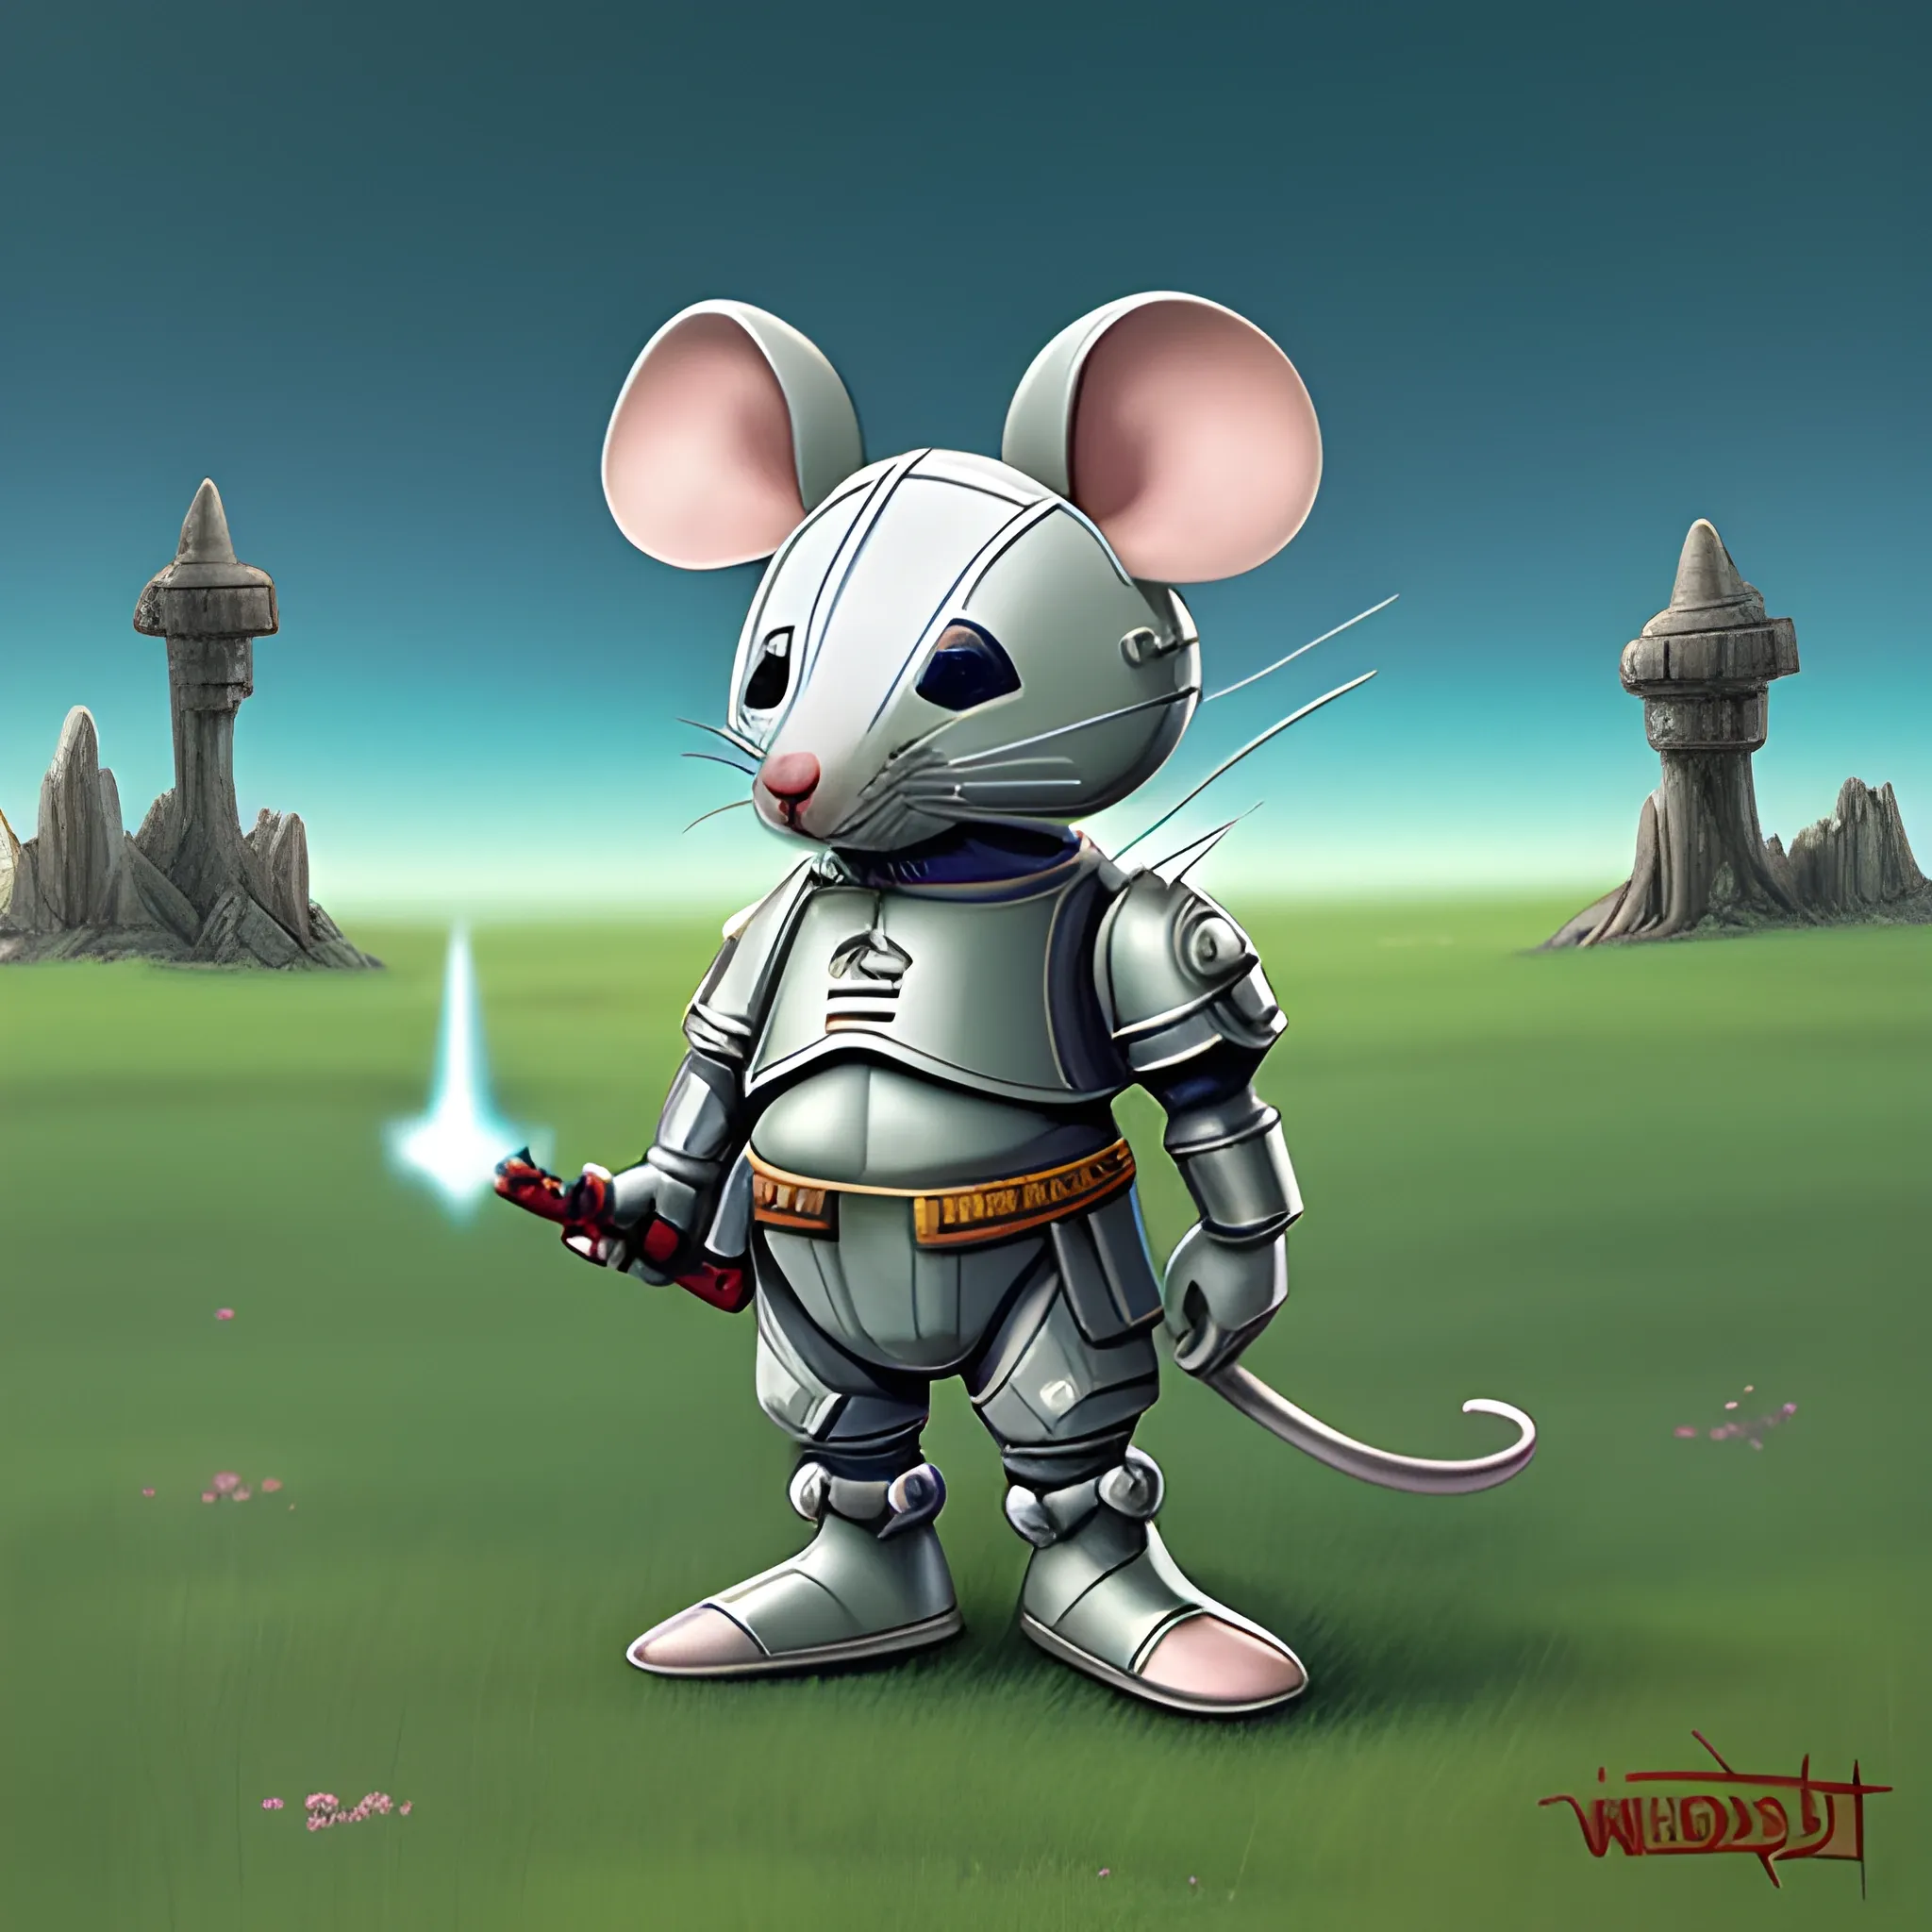 General Mouse is wearing a technology powered armor. Holding a sward, Trippy